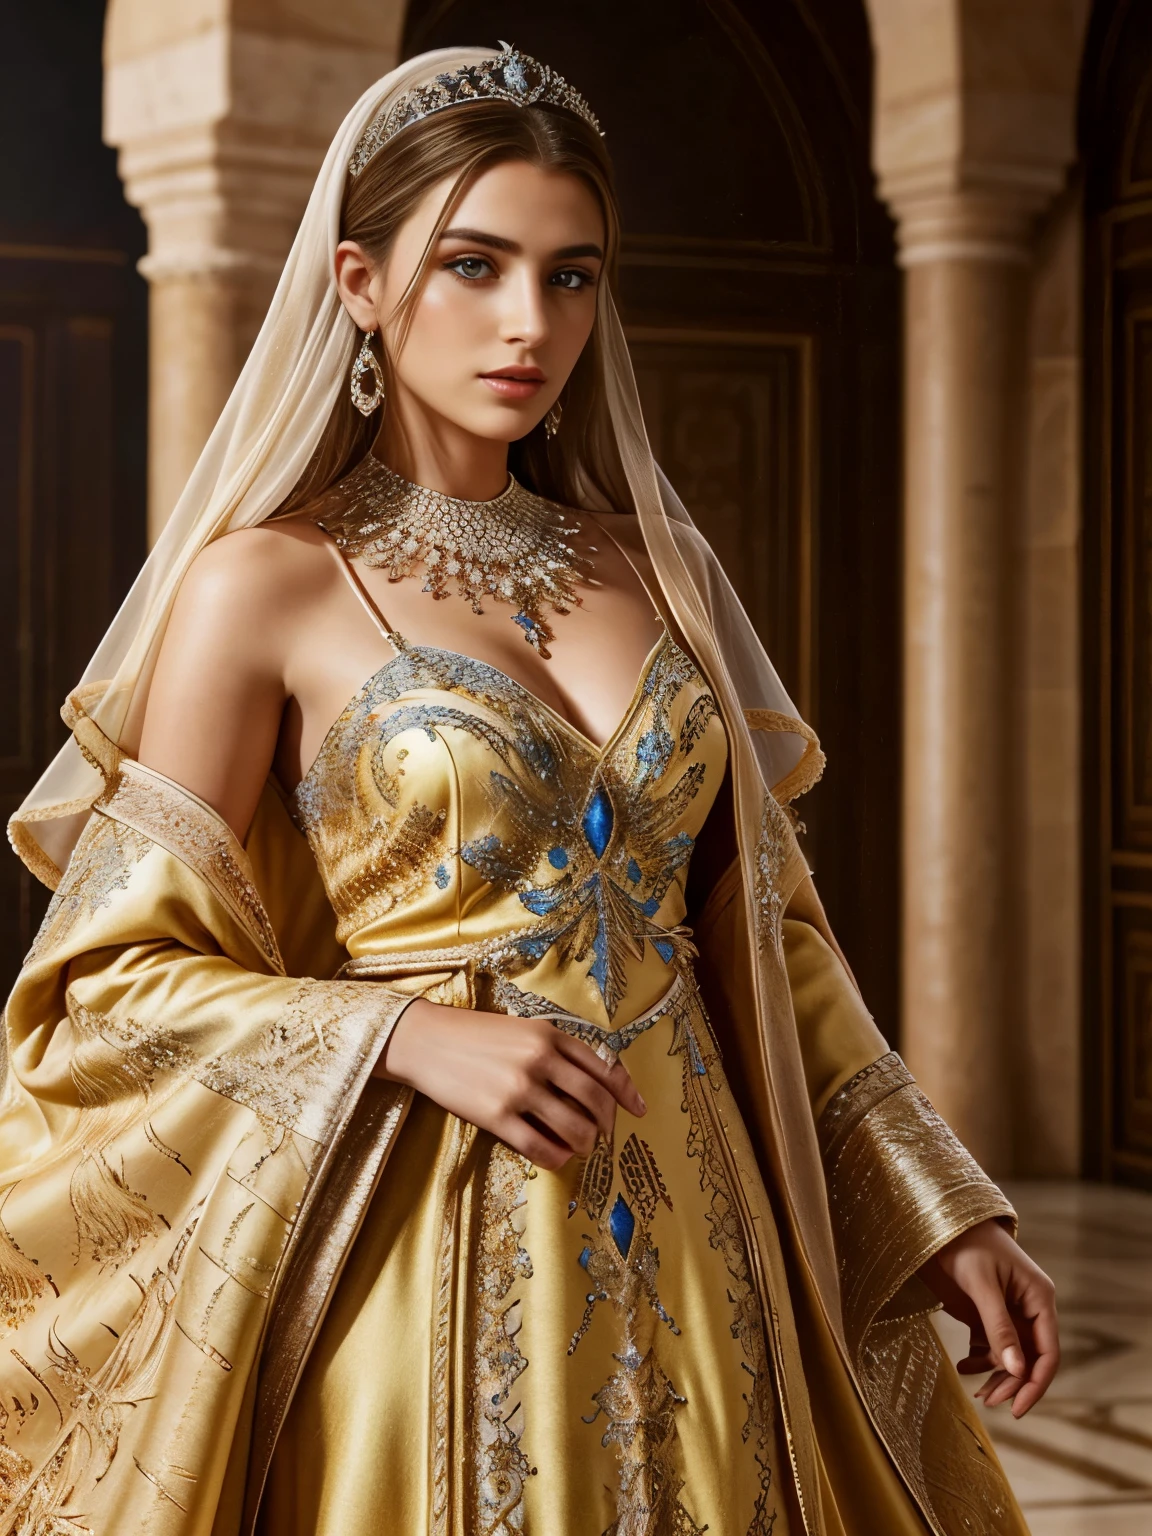 Very Beautiful européenne Princesse glowing crystal eyes hyper realistic super detailed Dynamic shot master piece Full outfit caftan marocain couvre